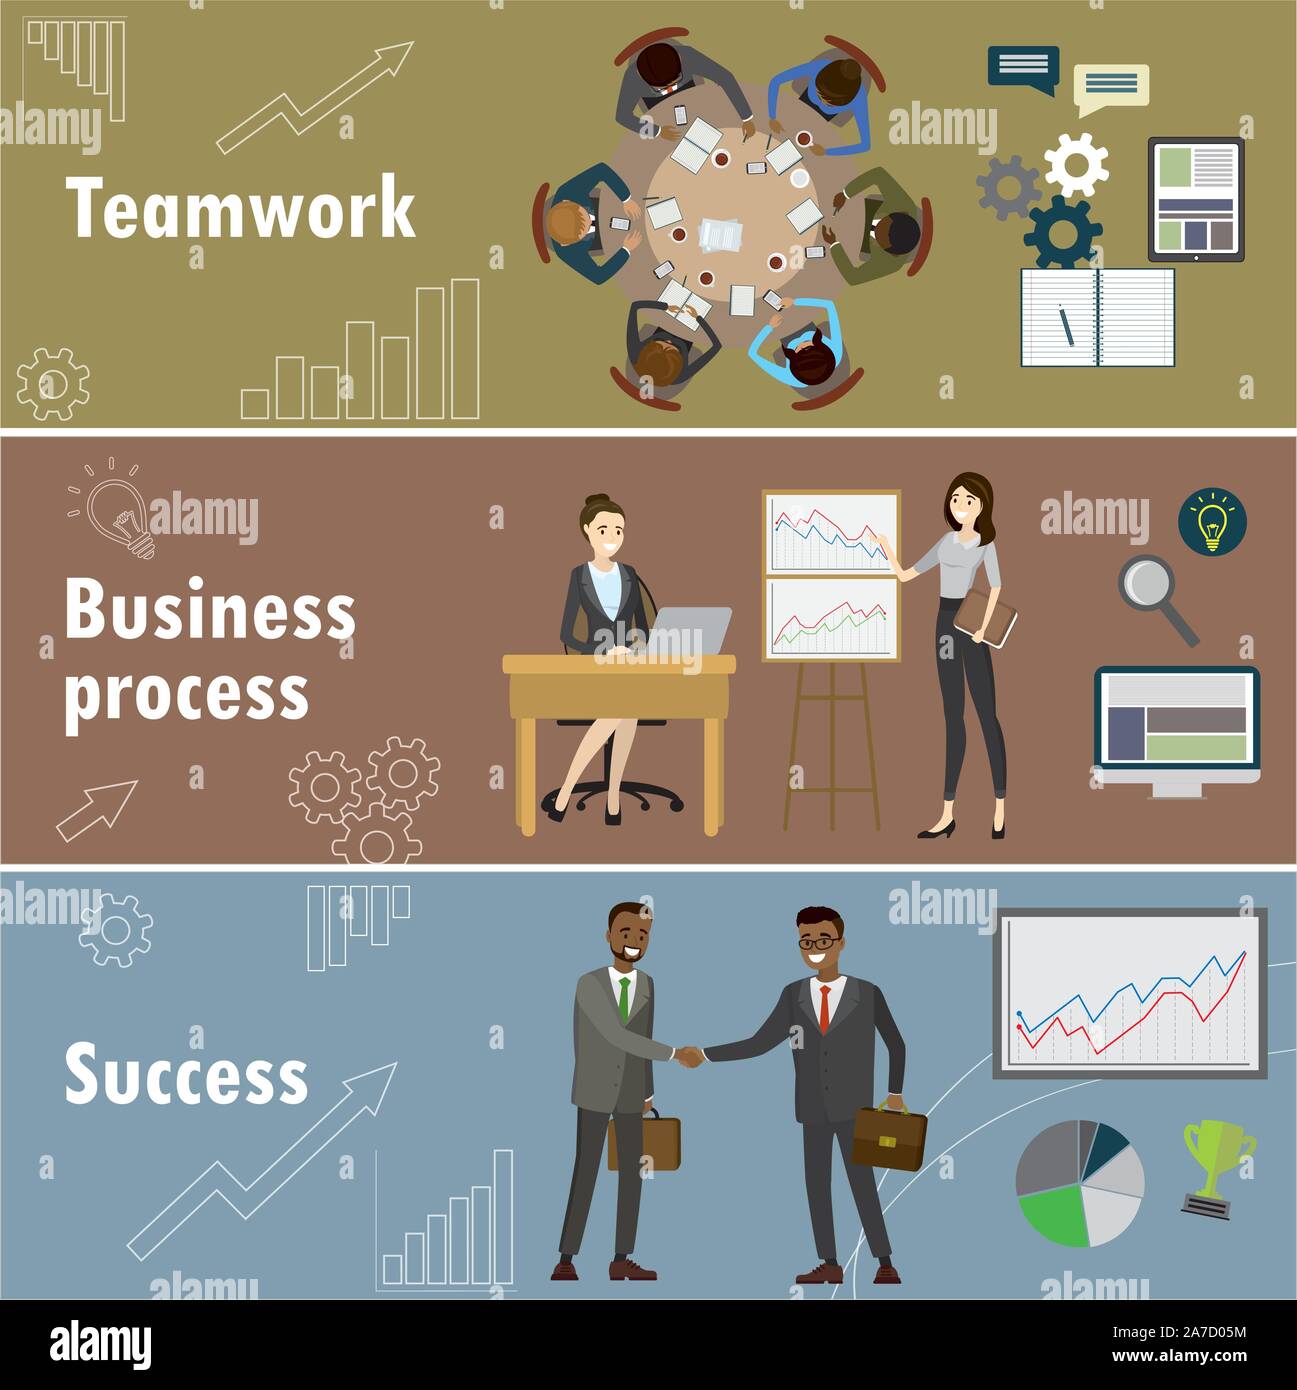 flat banner set with teamwork, business process and success, stock vector illustration. Stock Vector